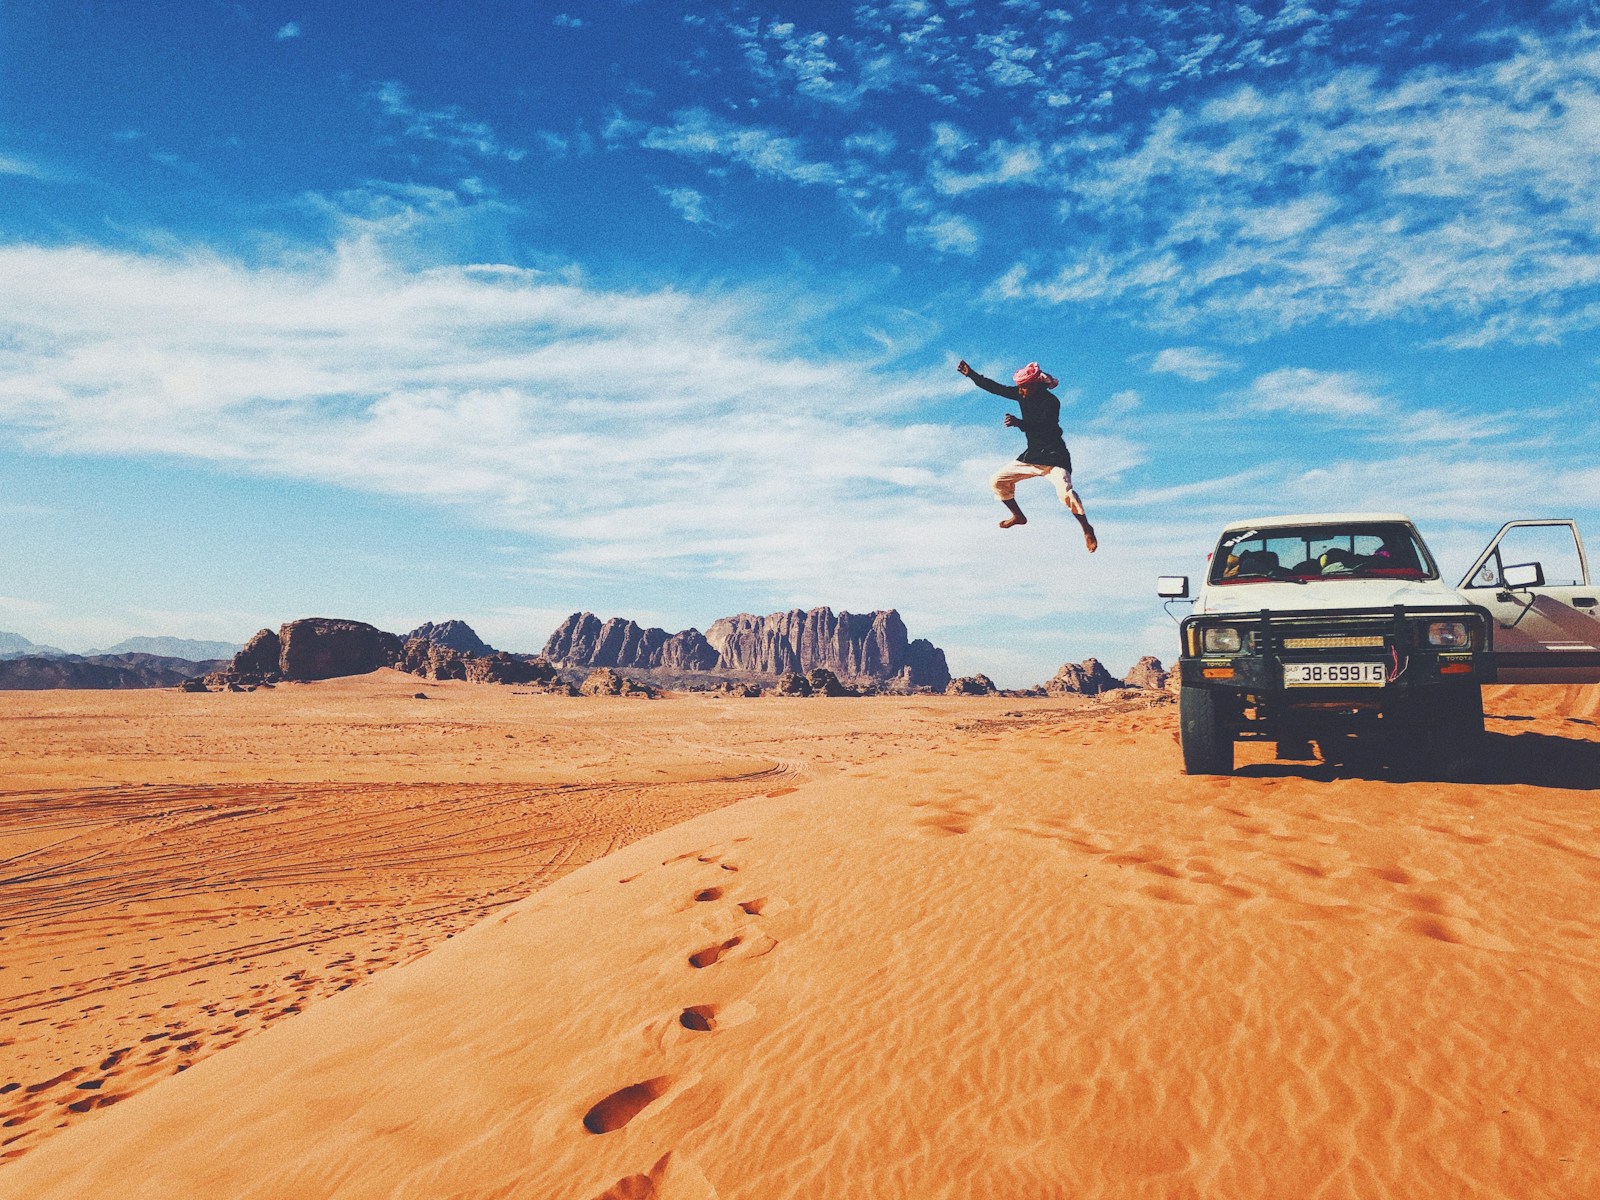 man jumping on brown sand under blue sky during daytime